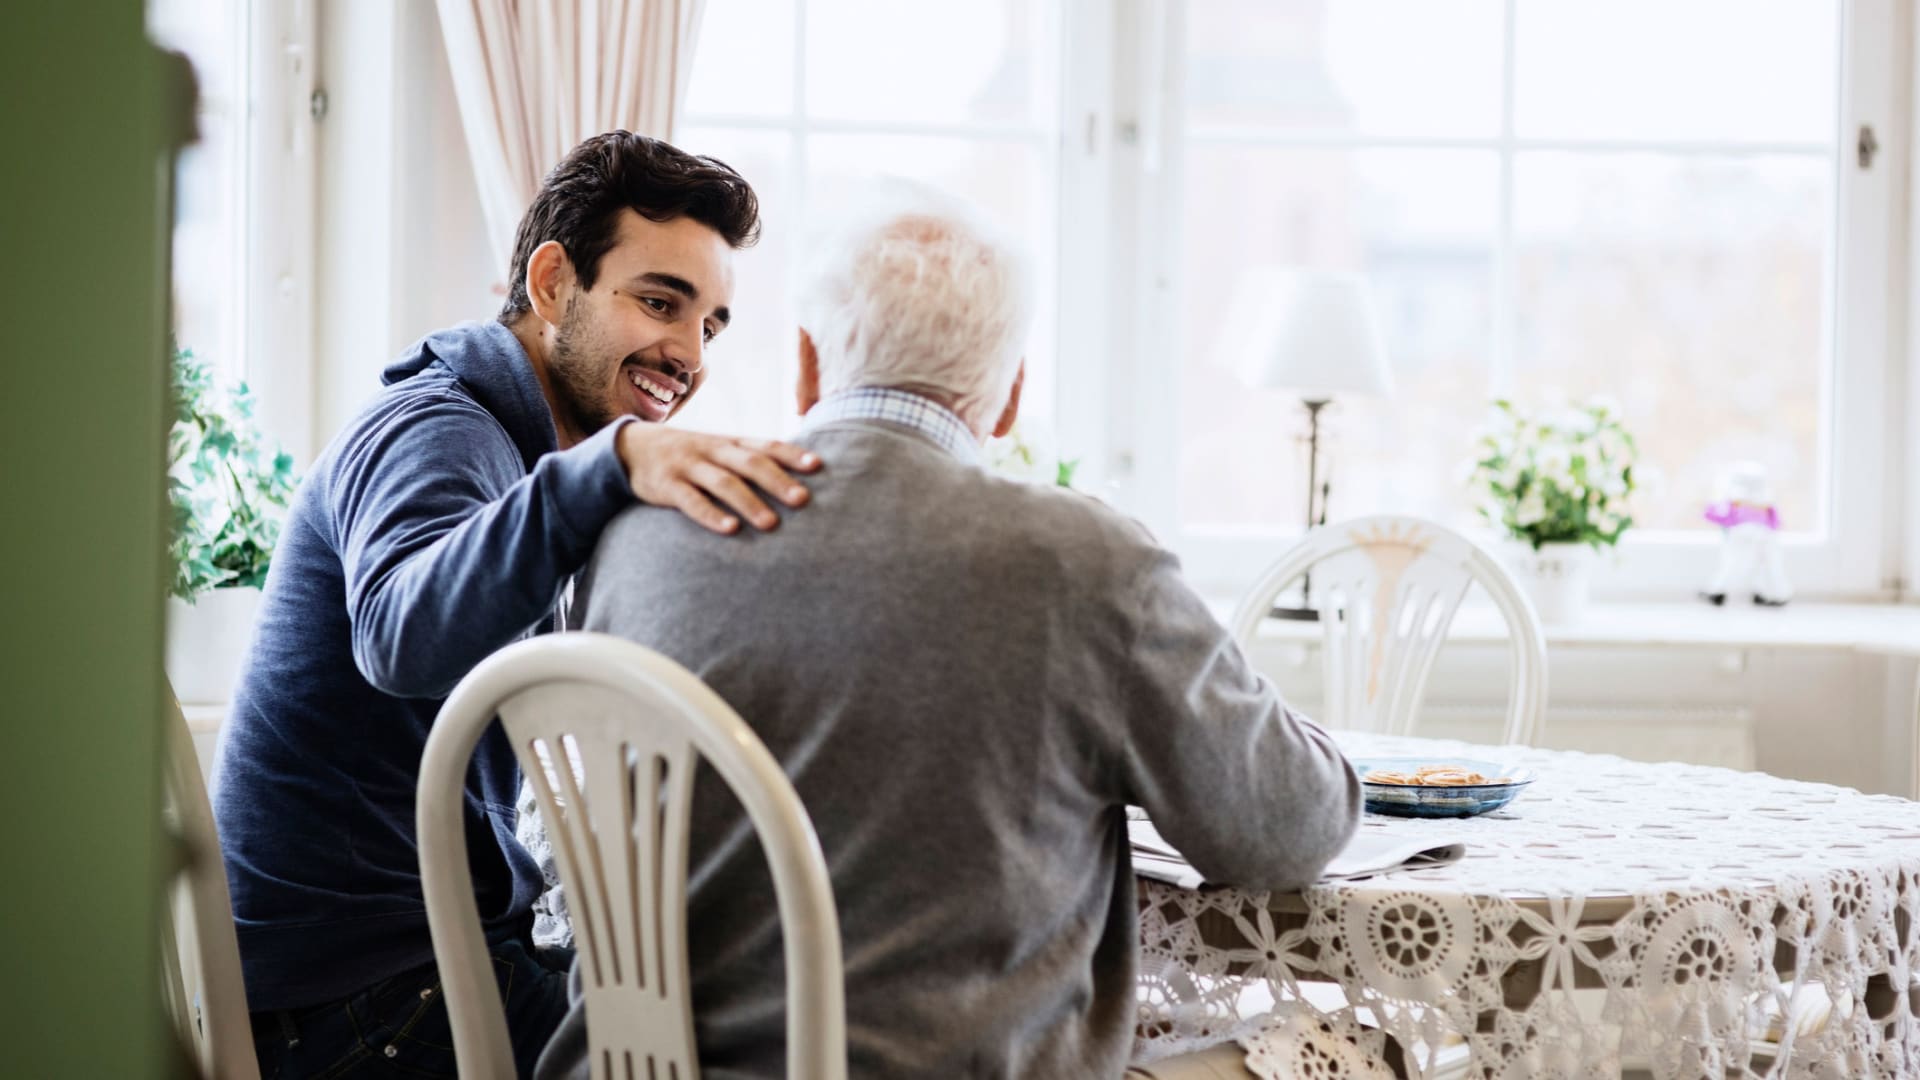 3 Strategies for Supporting Family Caregivers at Work